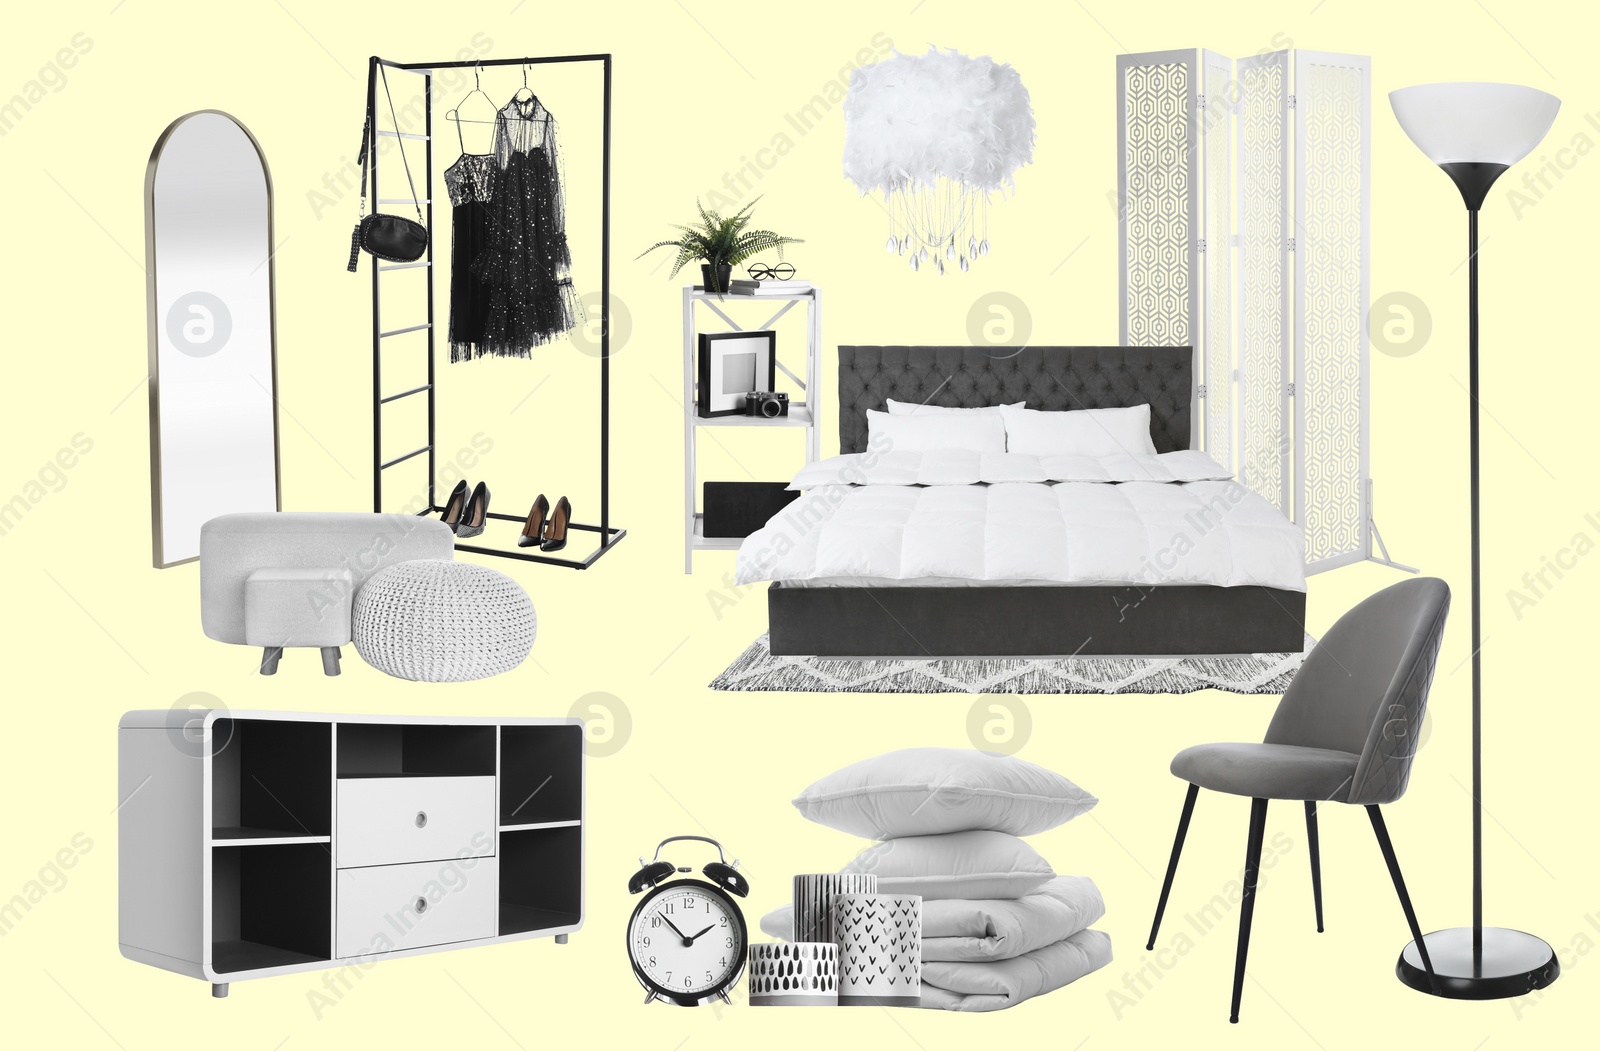 Image of Bedroom interior design. Collage with different combinable furniture and decorative elements on pale light yellow background